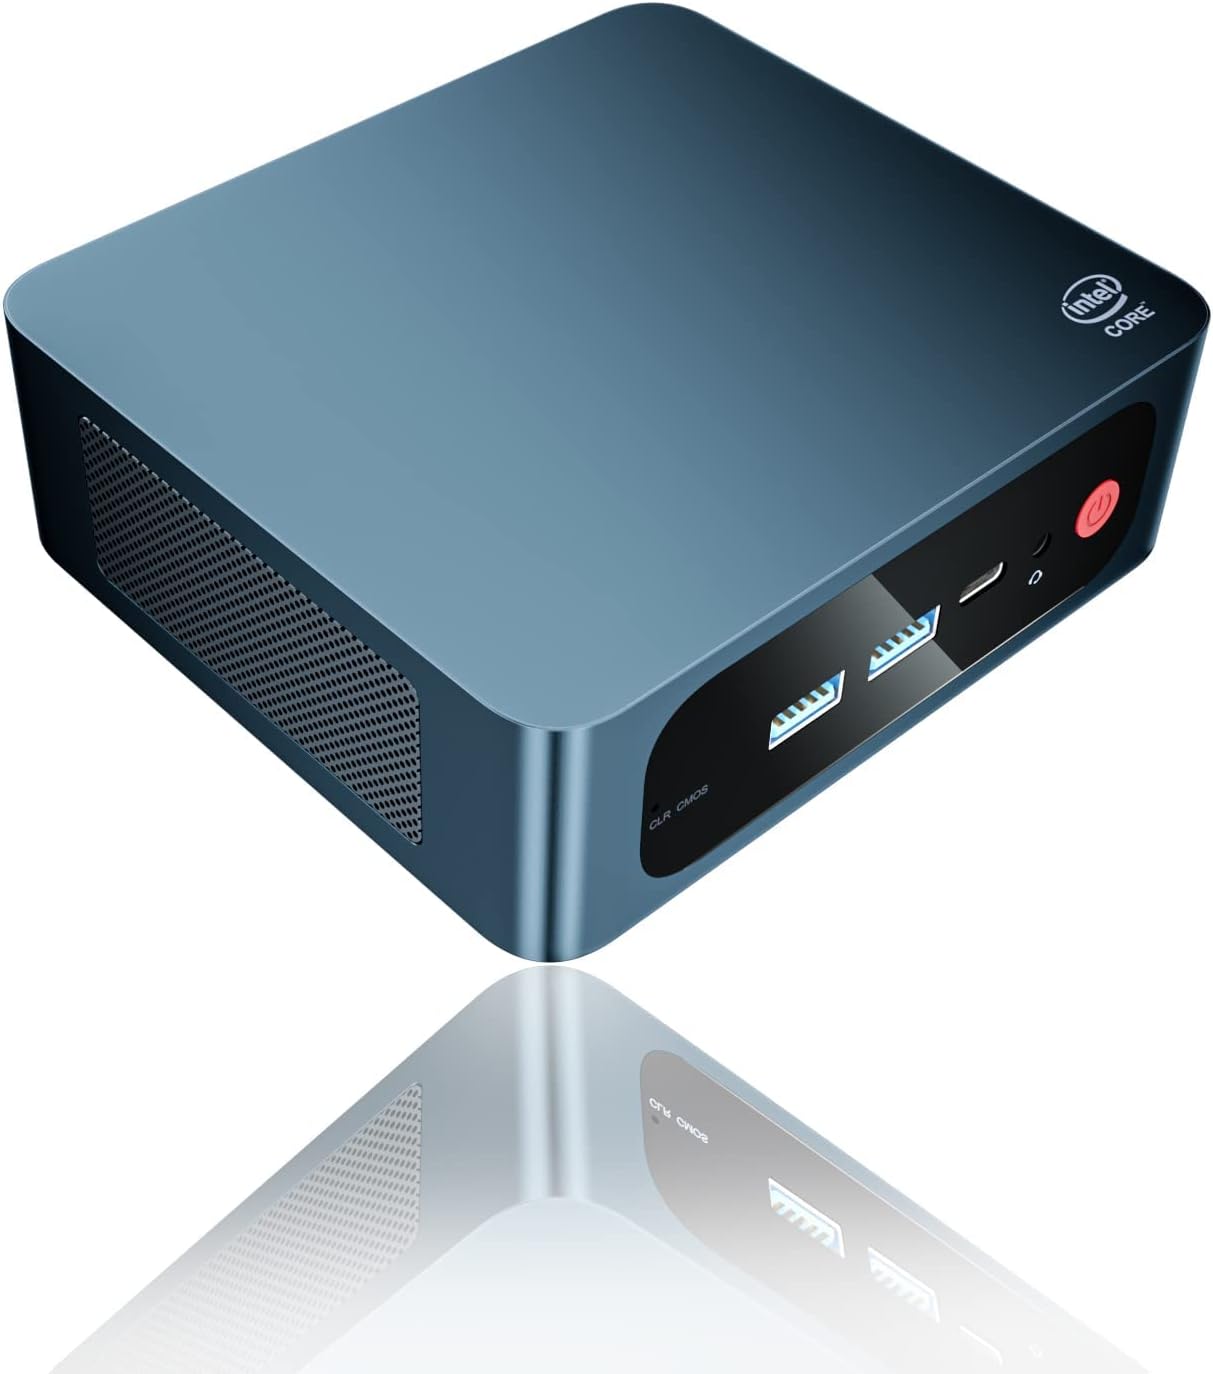 Mini PC Desktop Intel 8109U(Up to 3.6GHz) 16GB DDR4 500G NVME SSD for Working Micro PC, Support Mini Computer WOS Pro/HD 4K@60Hz Dual HDMI Output/WiFi 5/BT 4.0/Type-C/ RJ45